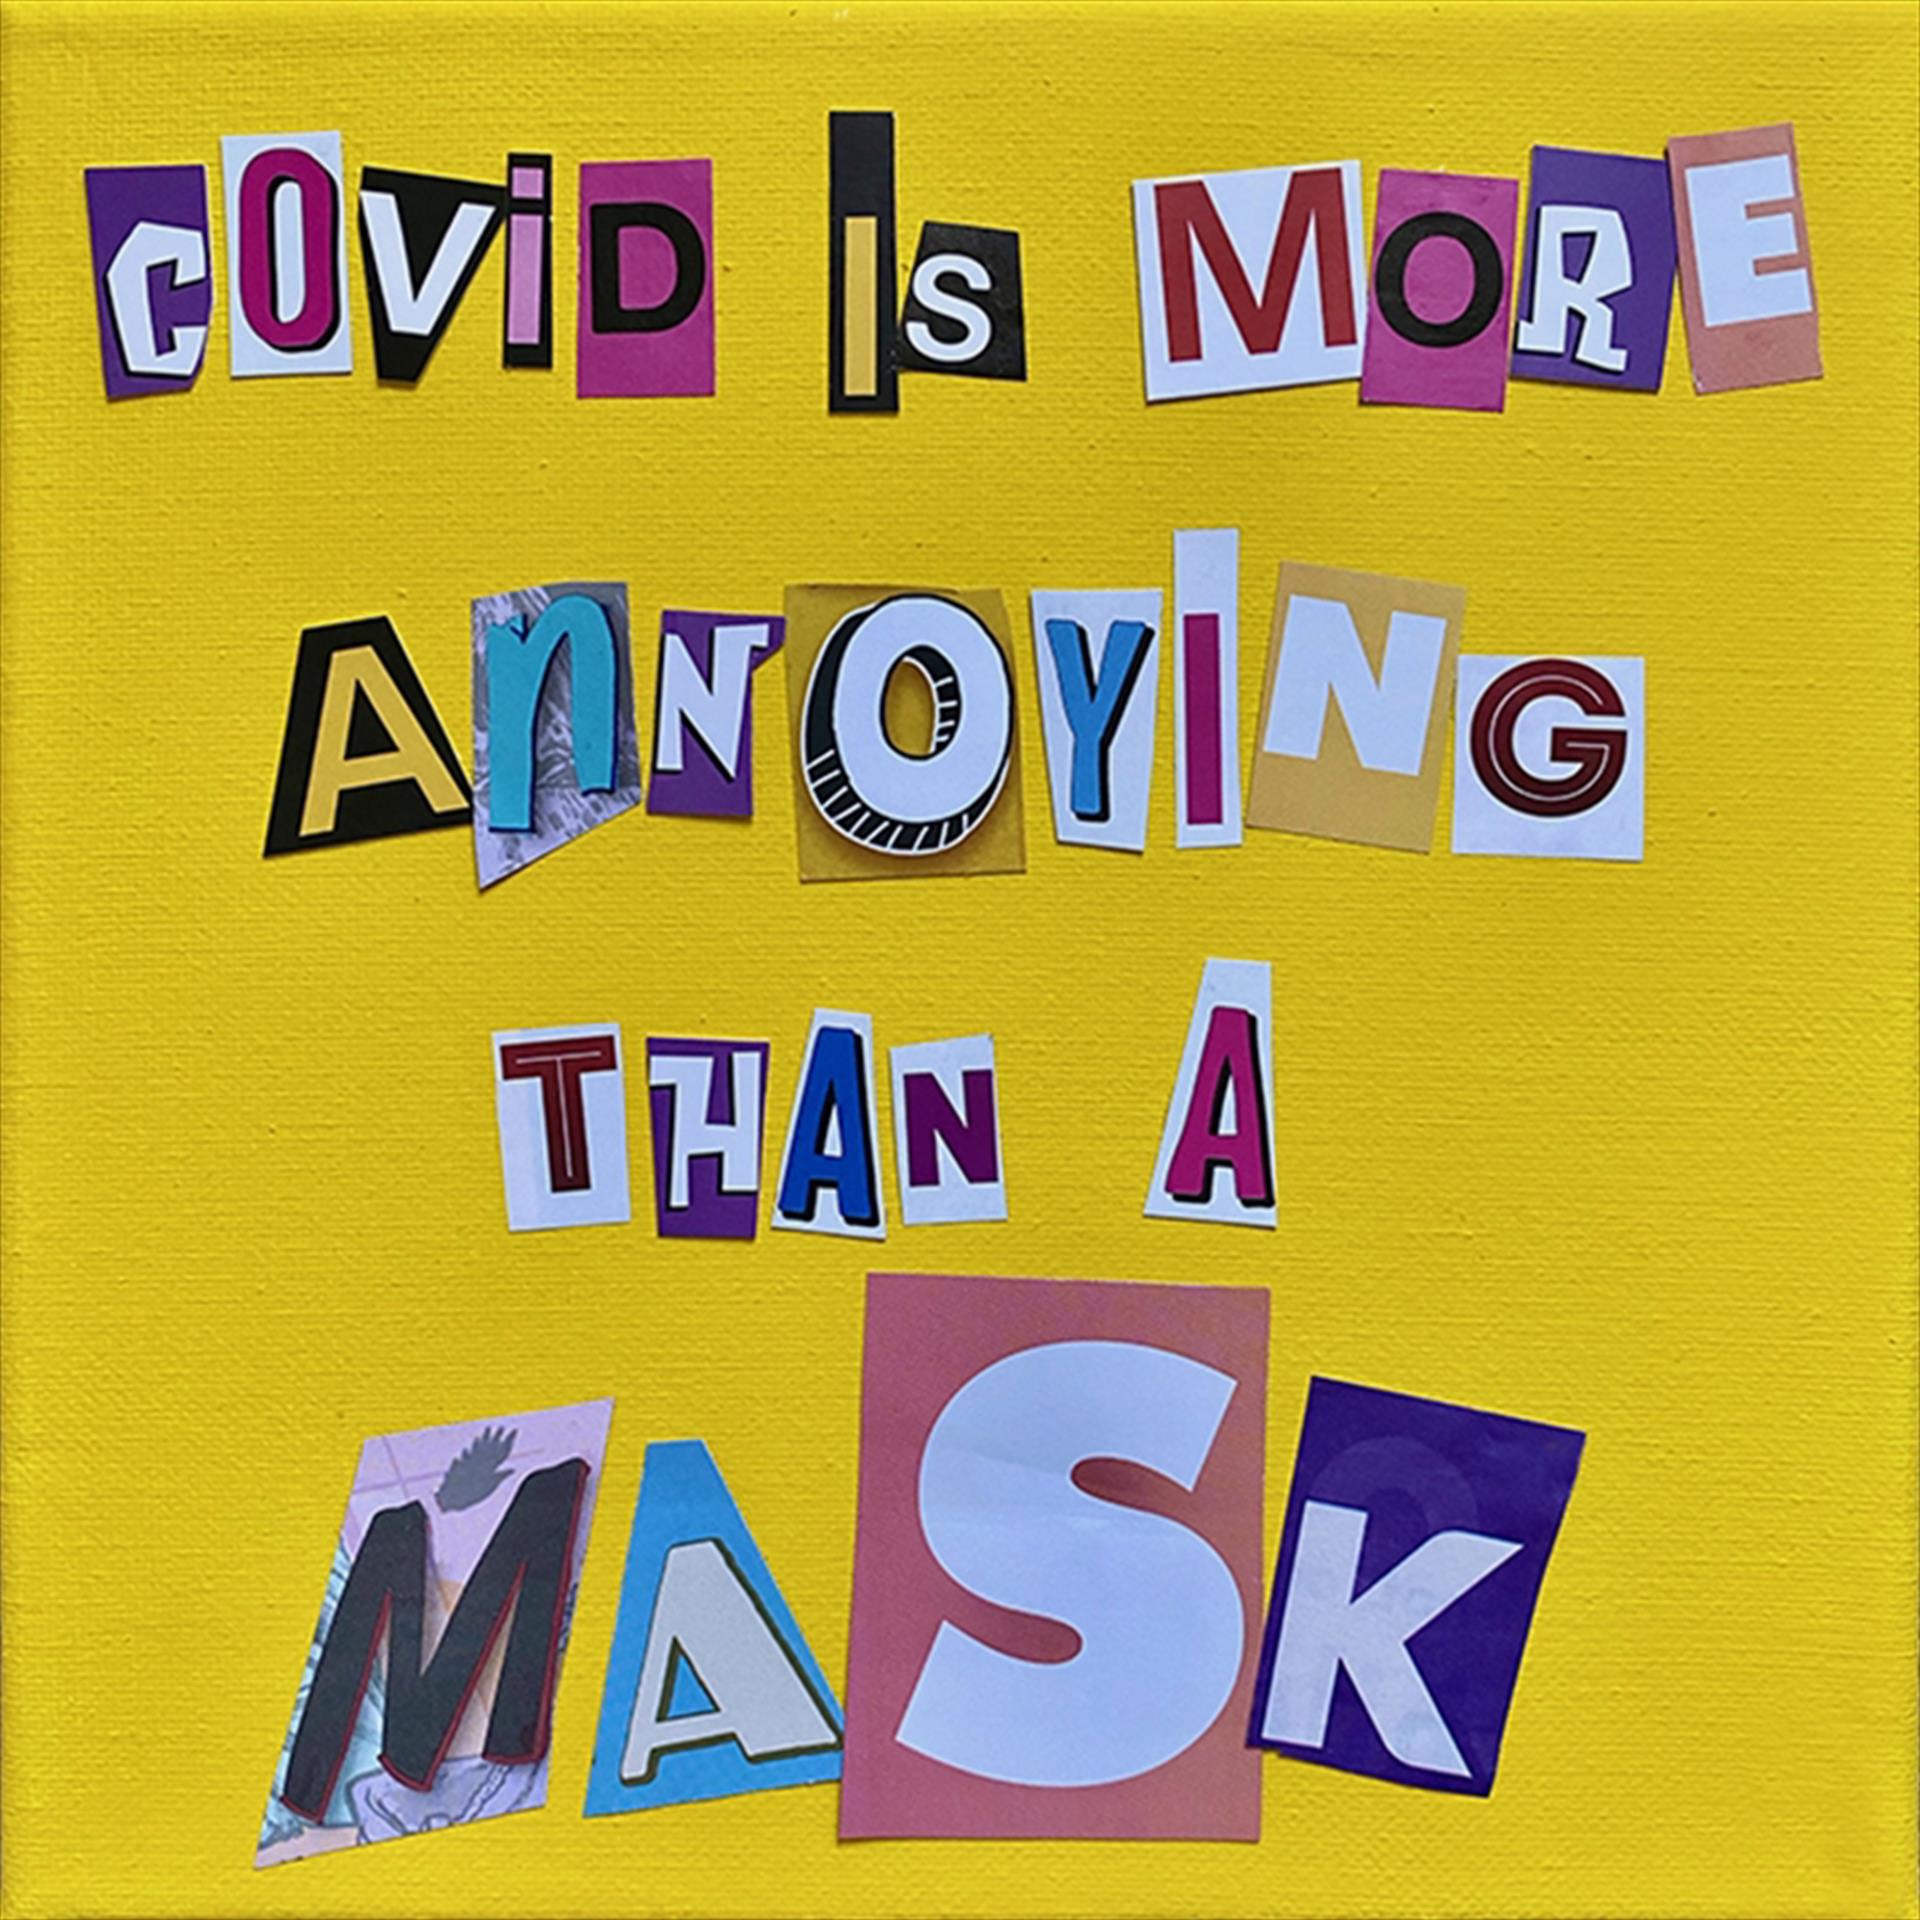 Betzi Stein "Covid is More Annoying Than a Mask" Acrylic and Collage on Canvas 8x8 $125